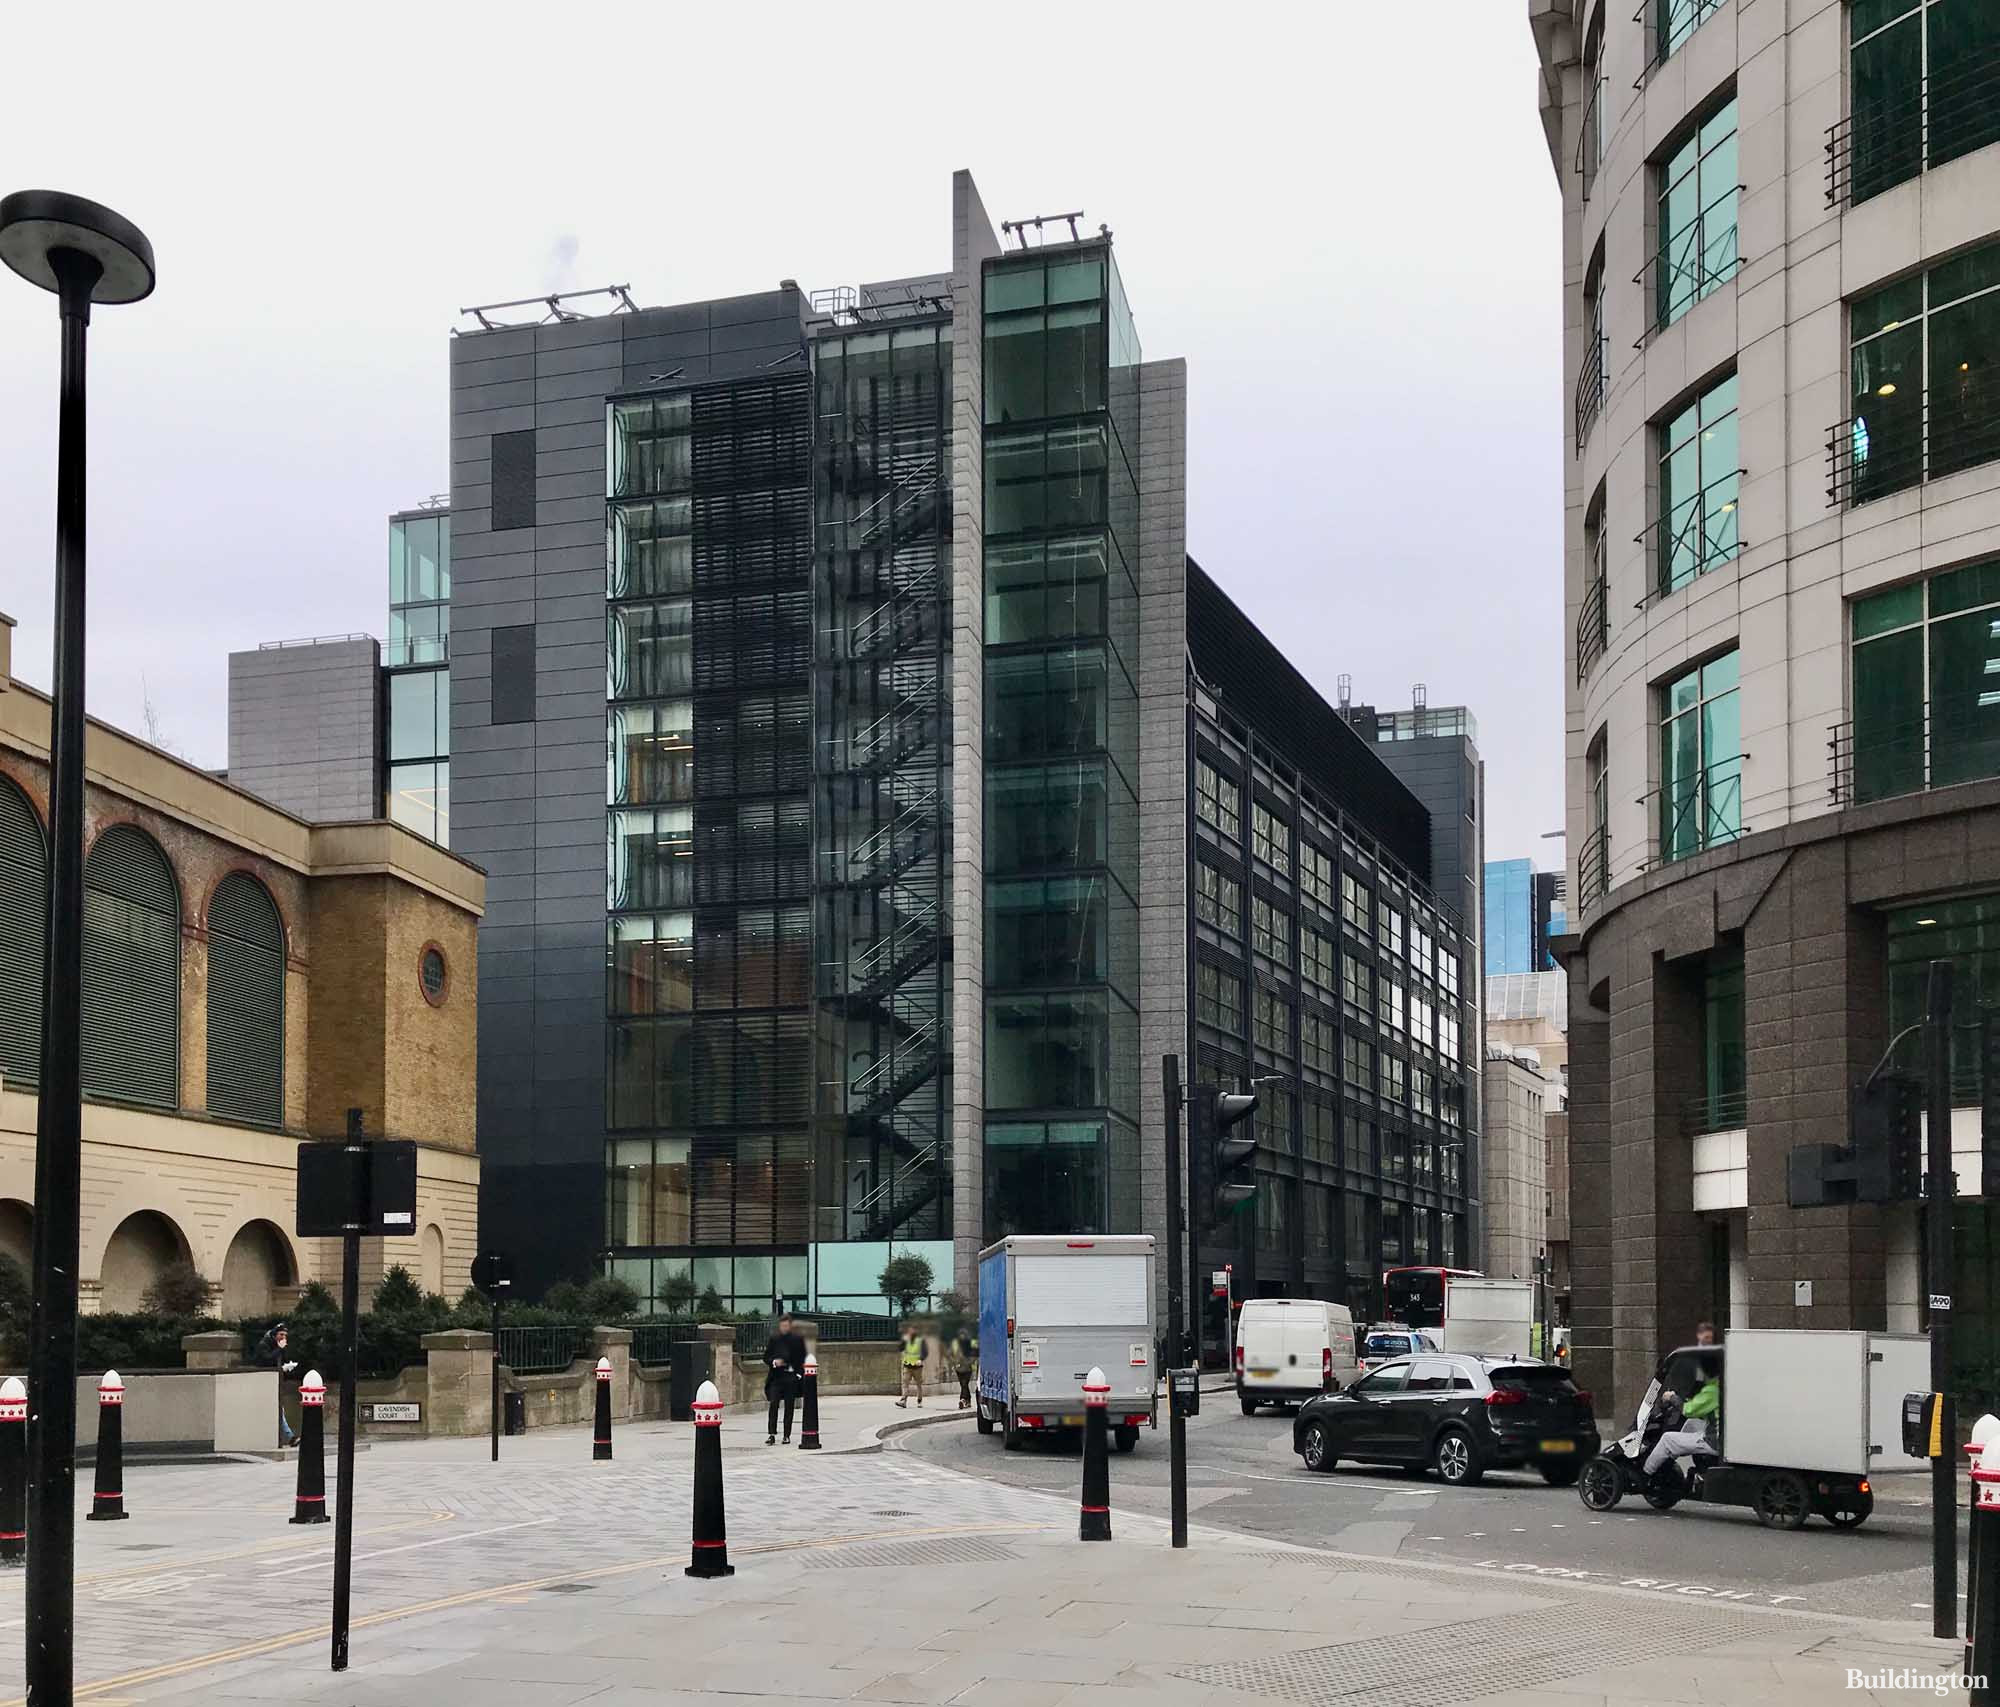 Premier Place by Stiff+Trevillion on the corner of Barbon Alley and Houndsditch in the City of London EC3.